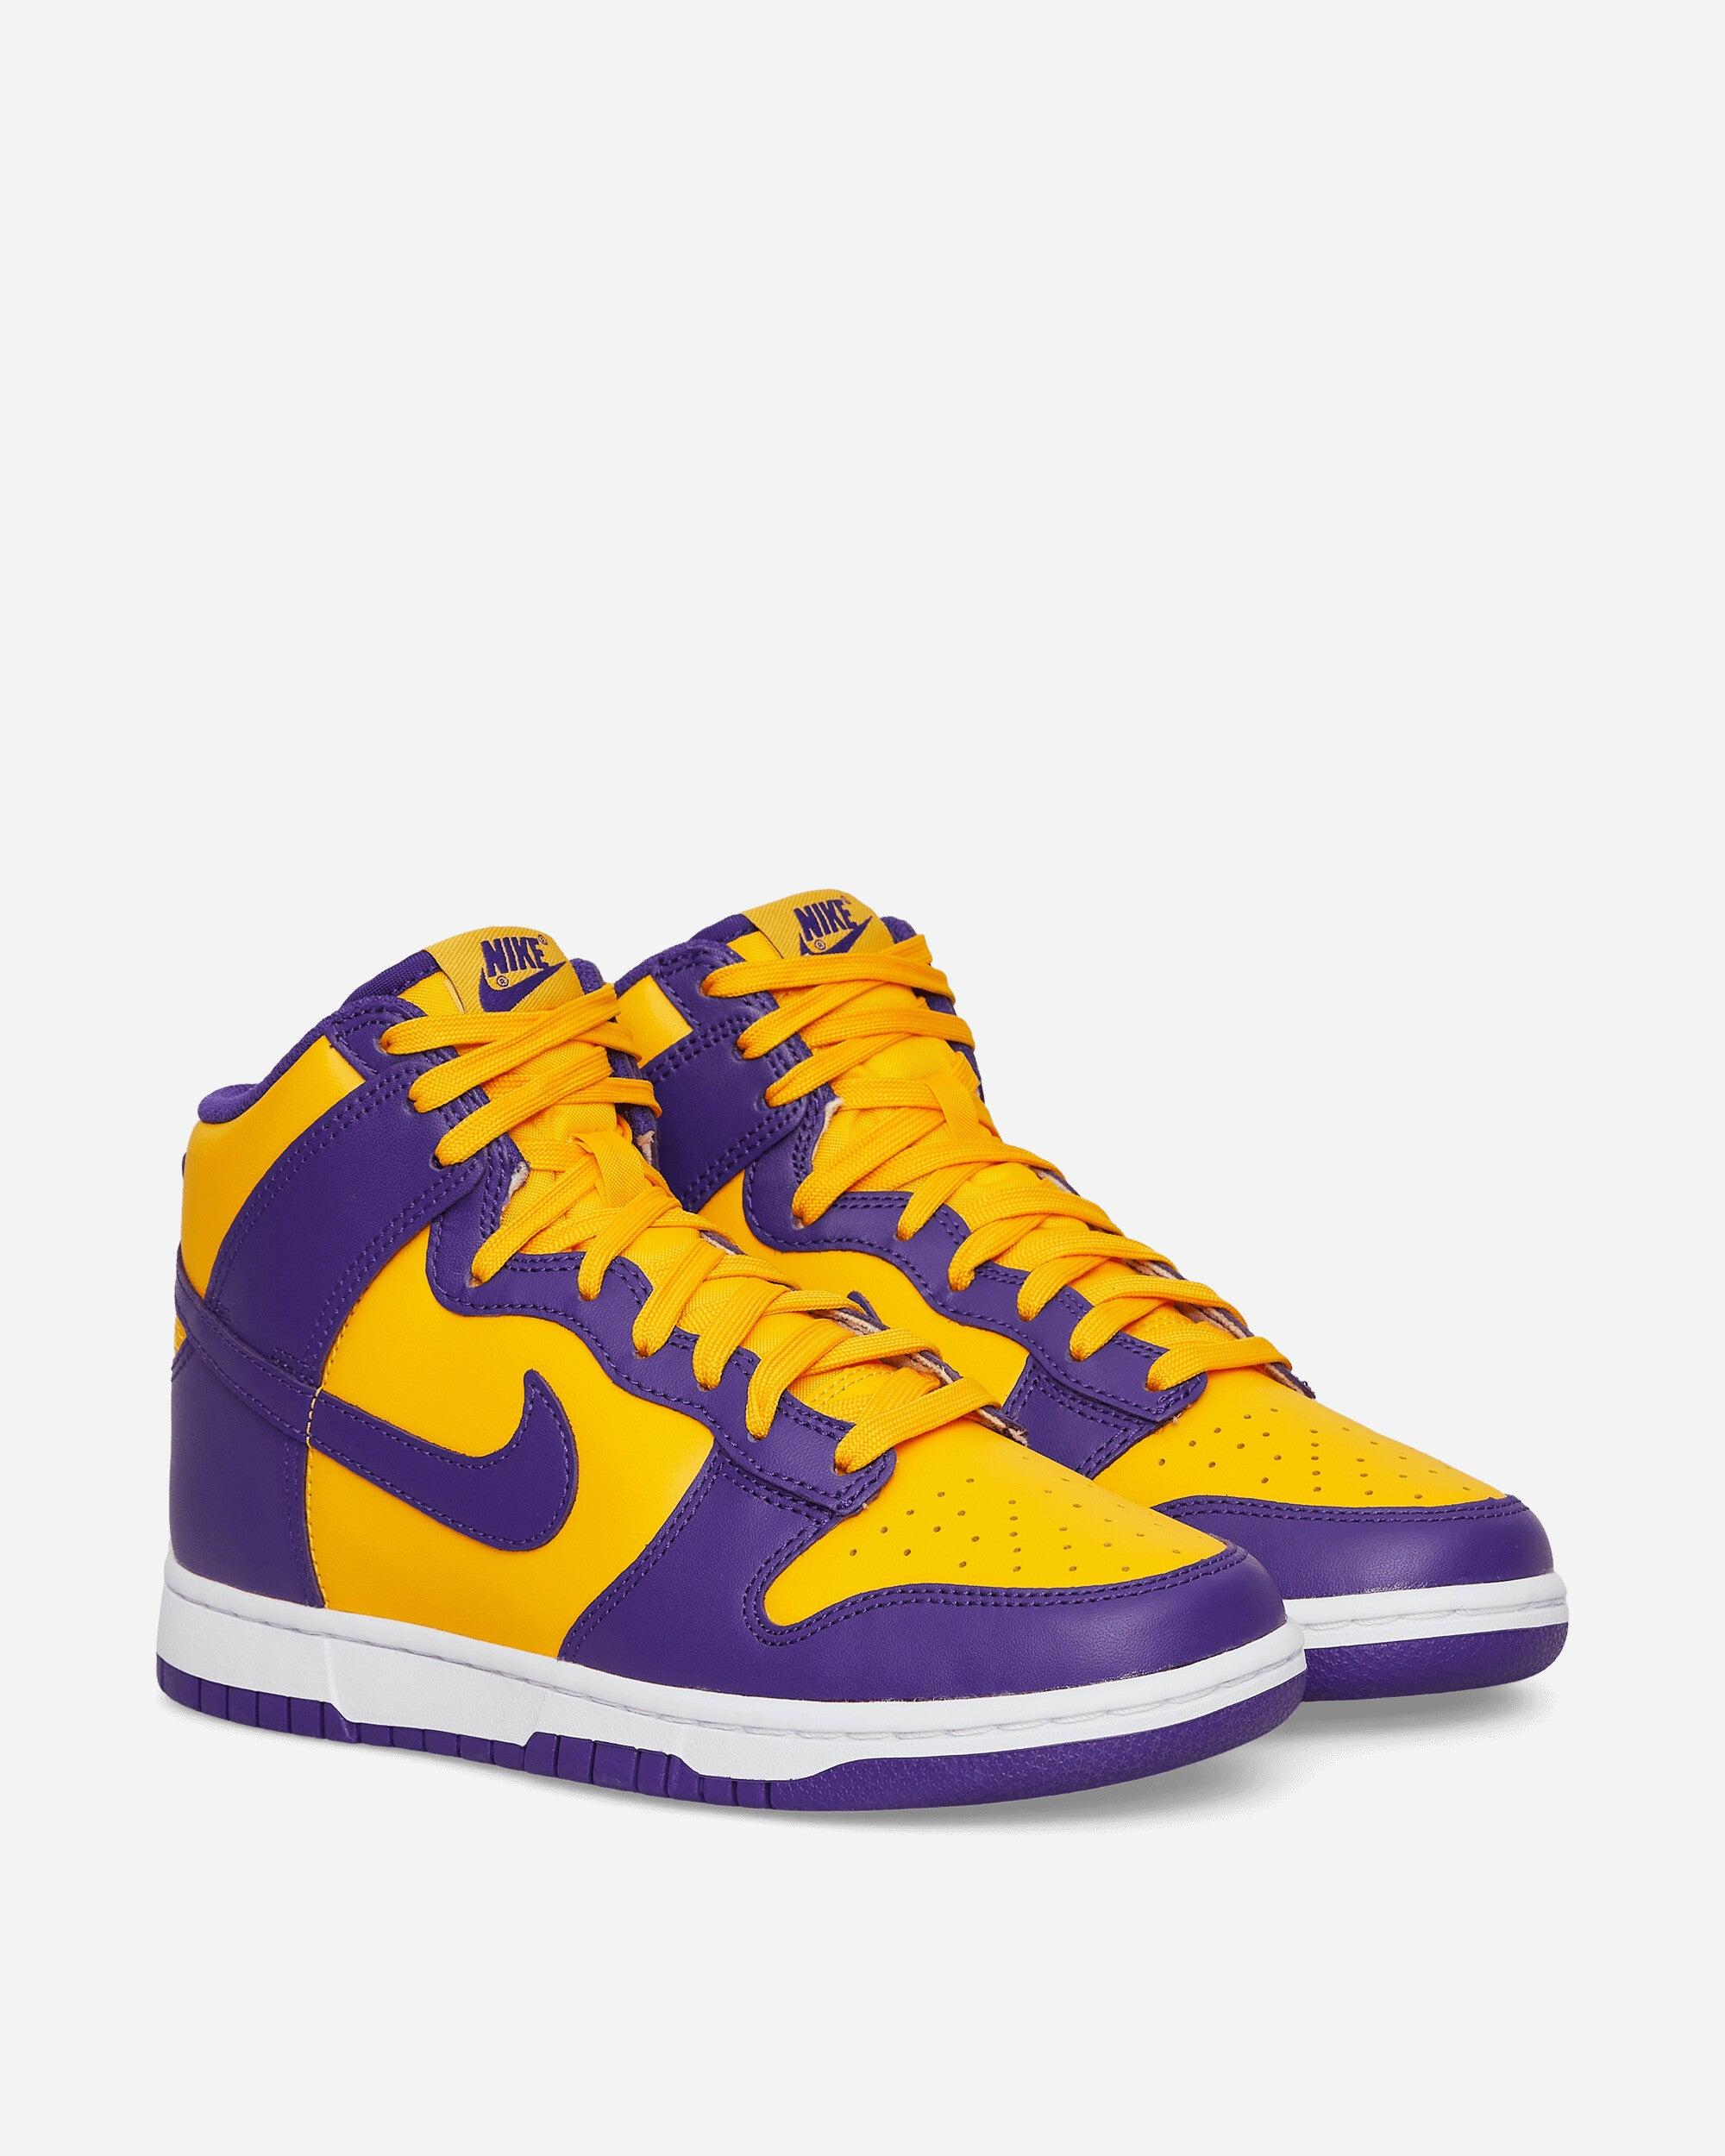 Nike Dunk High Retro Sneakers University Gold / Court in Purple